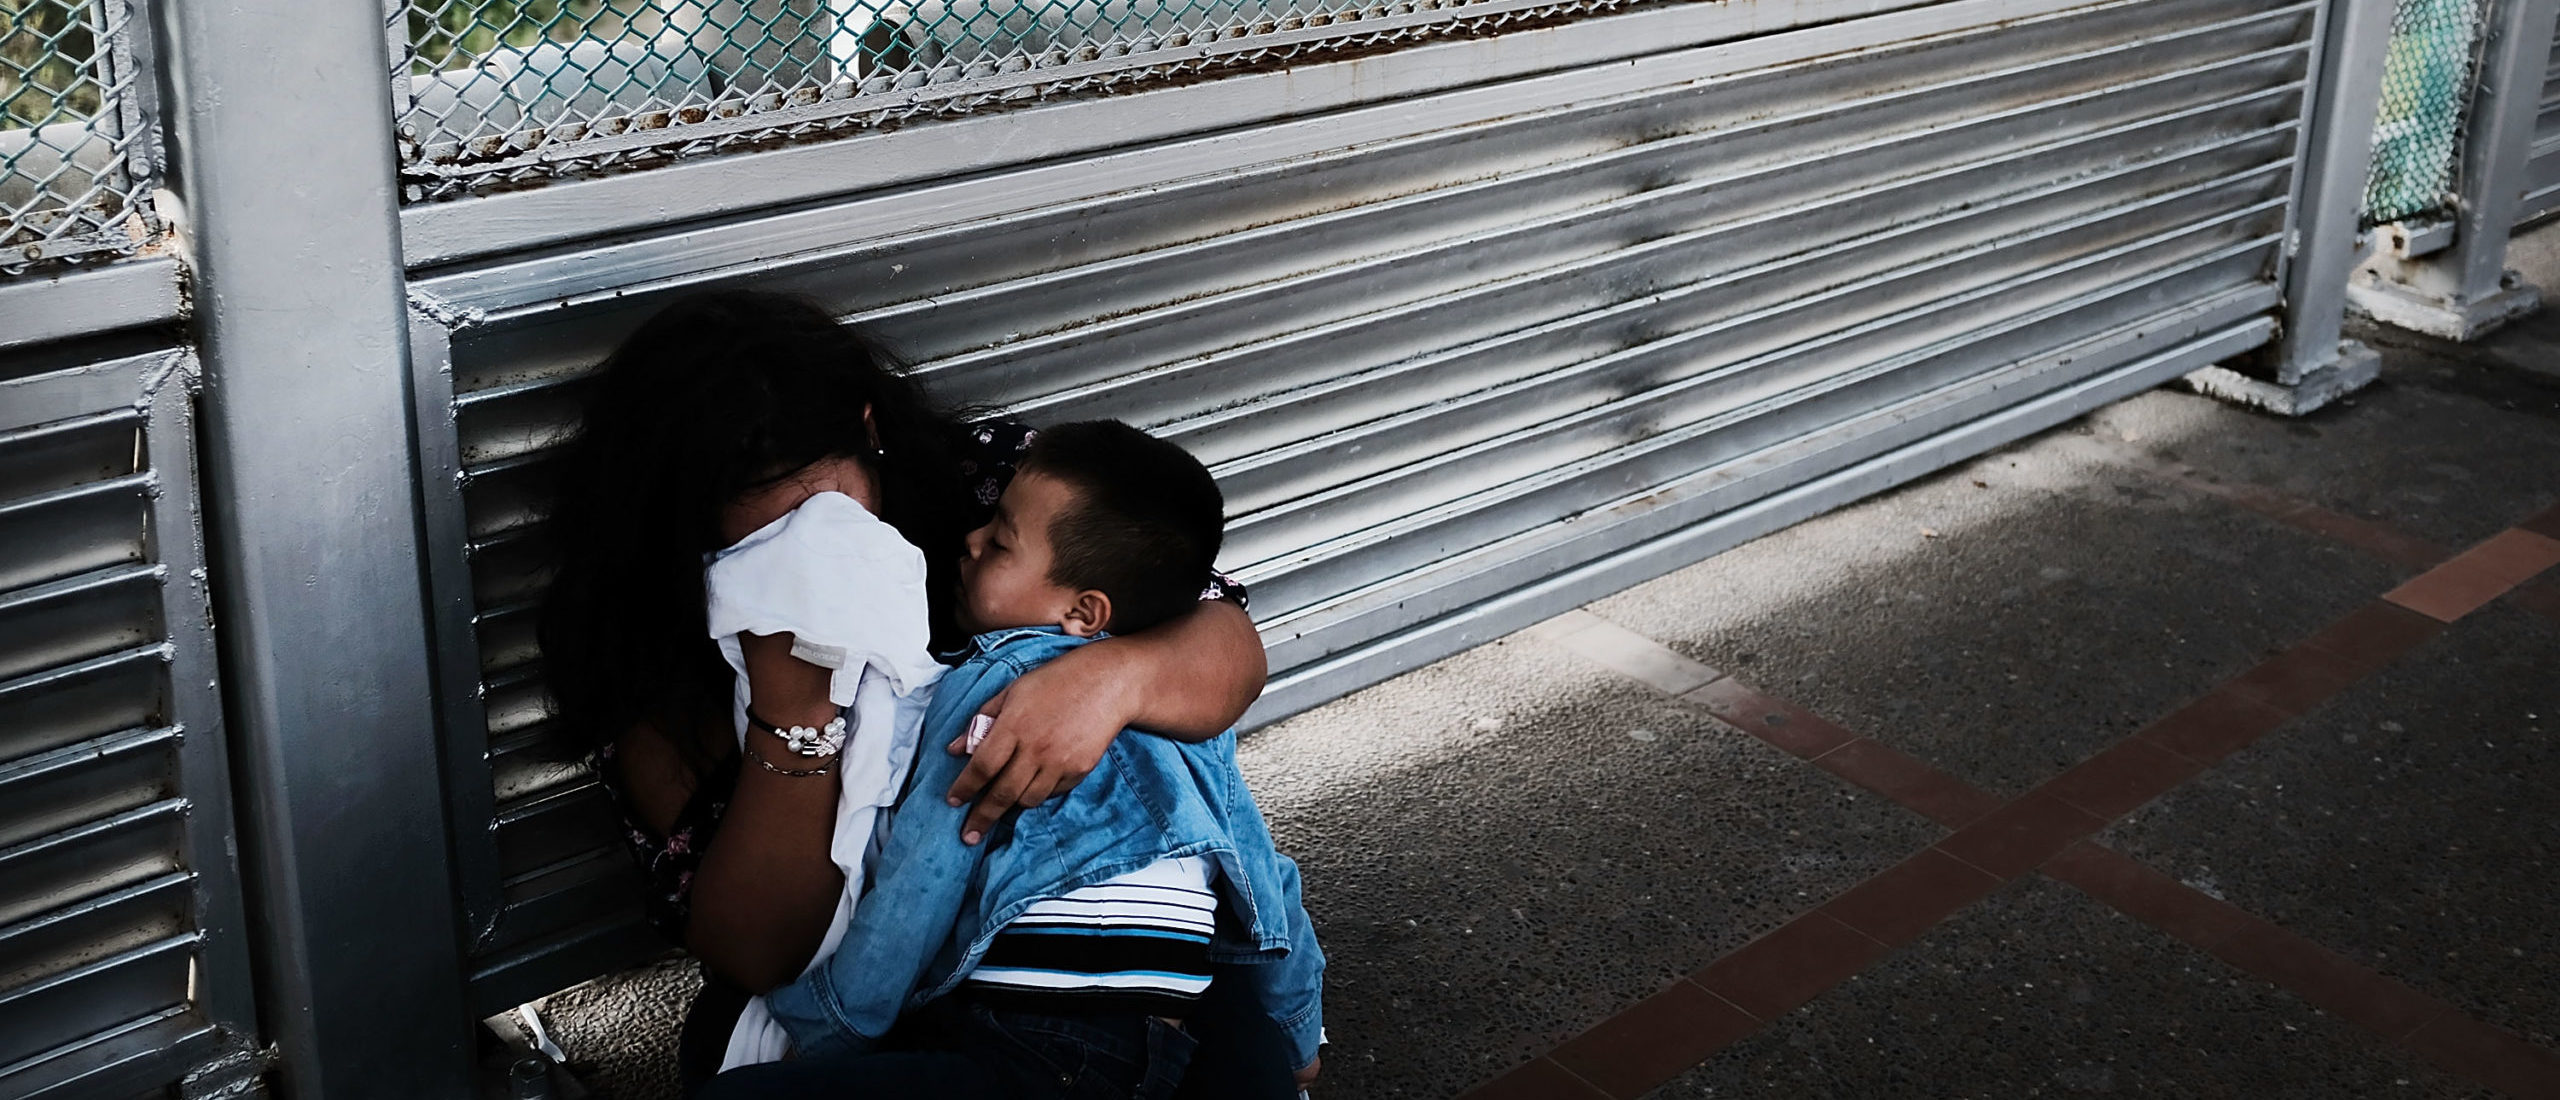 BROWNSVILLE, TX - JUNE 22: A crying Honduran woman and her child wait along the border bridge after being denied into the Texas city of Brownsville which has become dependent on the daily crossing into and out of Mexico on June 22, 2018 in Brownsville, Texas. Immigration has once again been put in the spotlight as Democrats and Republicans spar over the detention of children and families seeking asylum at the border. Before President Donald Trump signed an executive order Wednesday that halts the practice of separating families who were seeking asylum, over 2,300 immigrant children had been separated from their parents in the zero-tolerance policy for border crossers. (Photo by Spencer Platt/Getty Images)